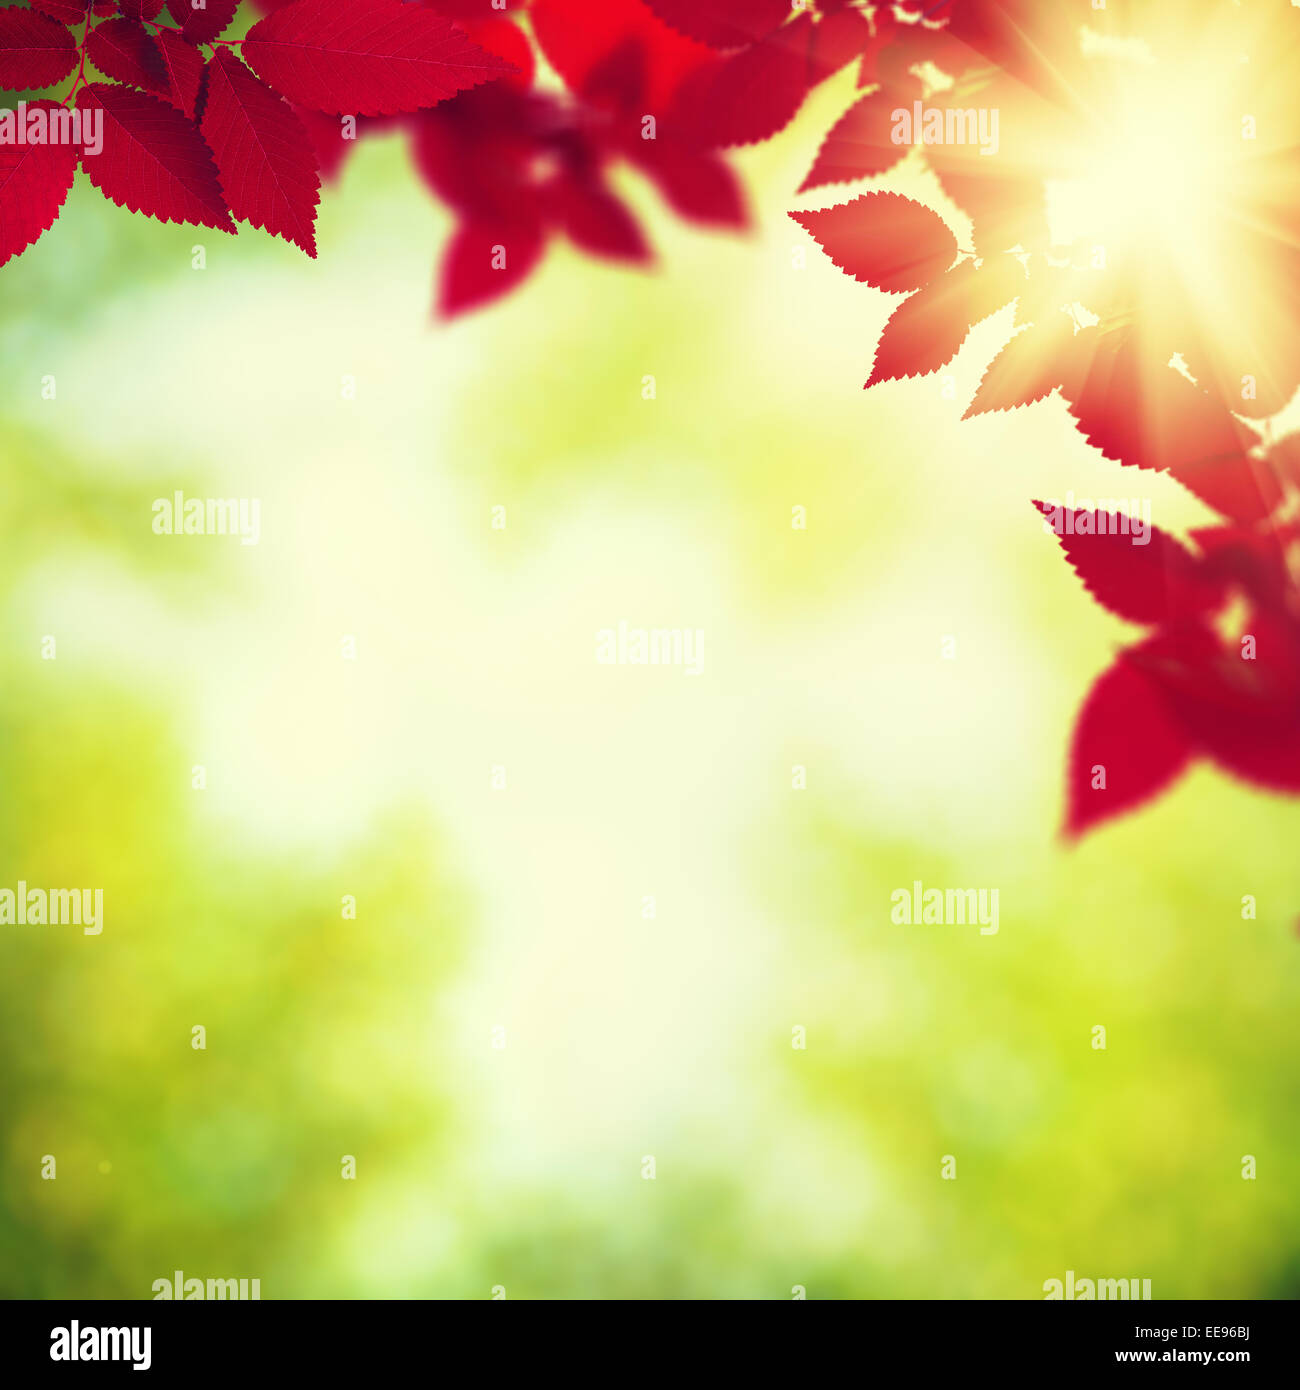 Autumnal foliage over green blurred backgrounds Stock Photo